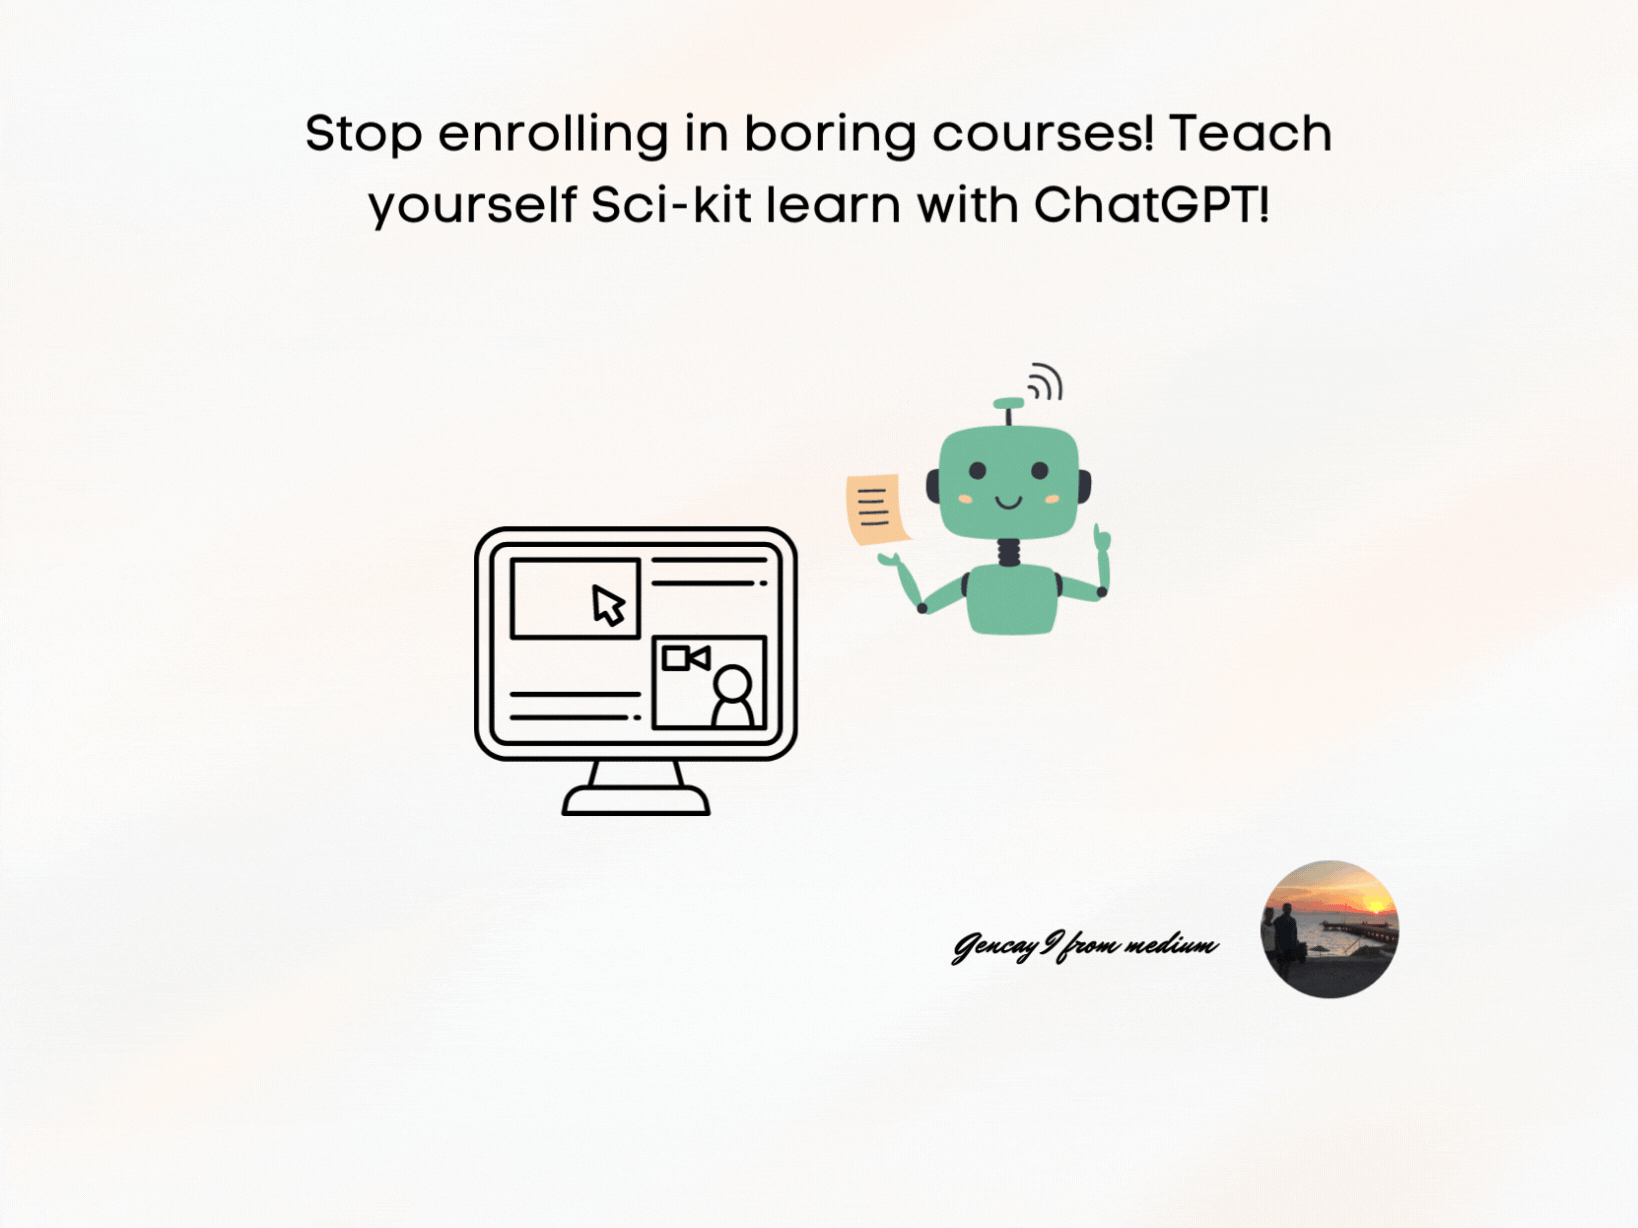 Stop Enrolling in Boring Courses! Teach Yourself Sci-Kit Learn With ChatGPT!